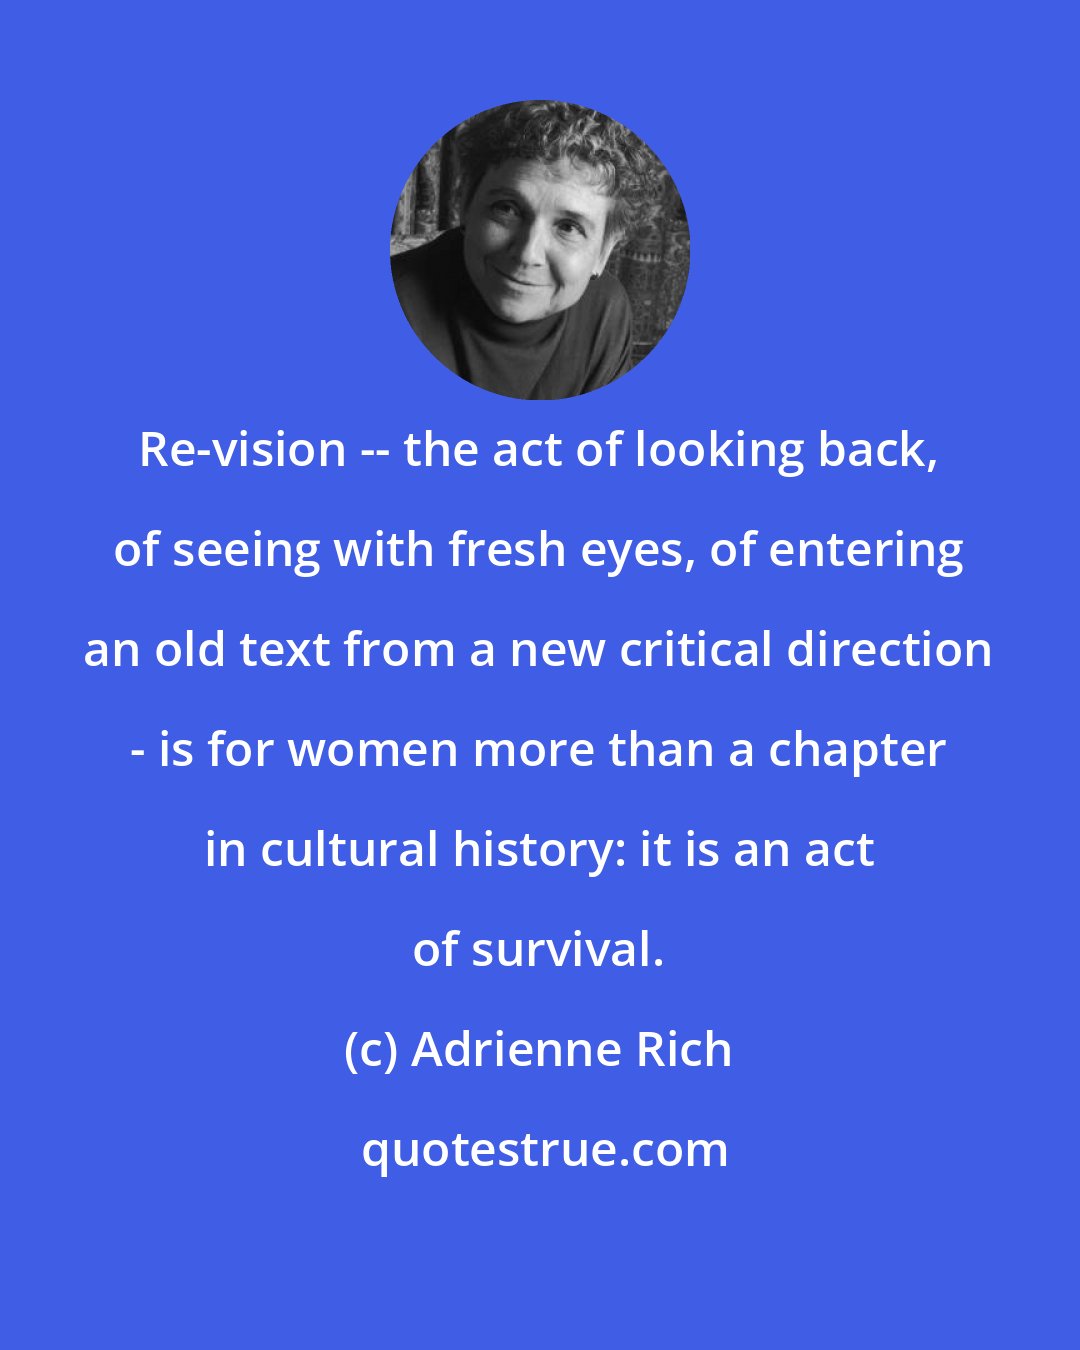 Adrienne Rich: Re-vision -- the act of looking back, of seeing with fresh eyes, of entering an old text from a new critical direction - is for women more than a chapter in cultural history: it is an act of survival.